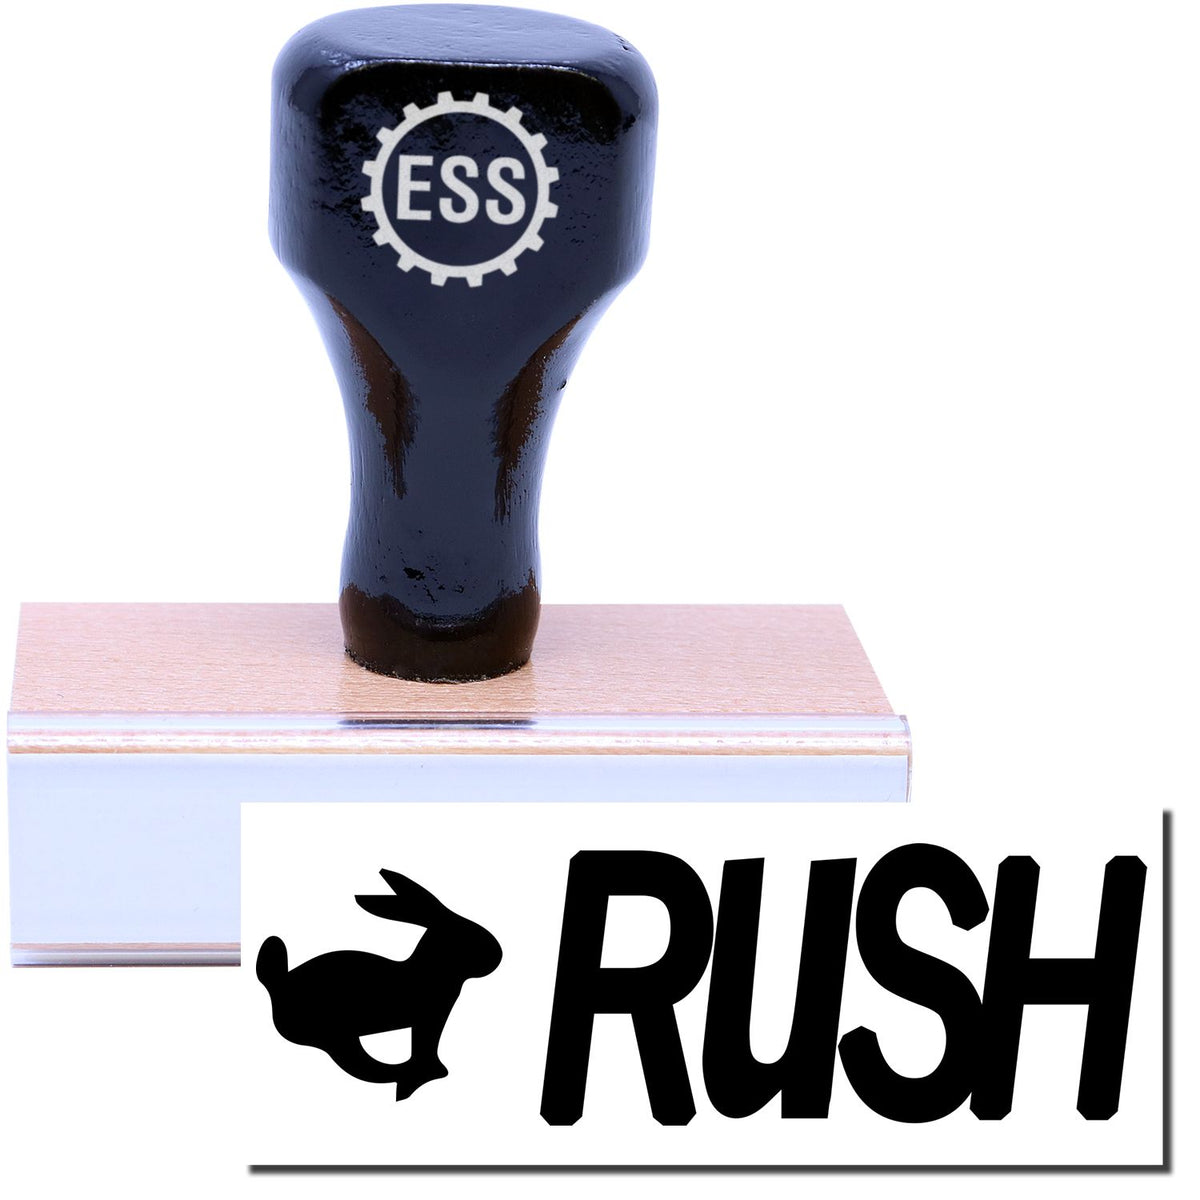 A stock office rubber stamp with a stamped image showing how the text &quot;RUSH&quot; in a large bold font with an image of a rabbit on the left side is displayed after stamping.